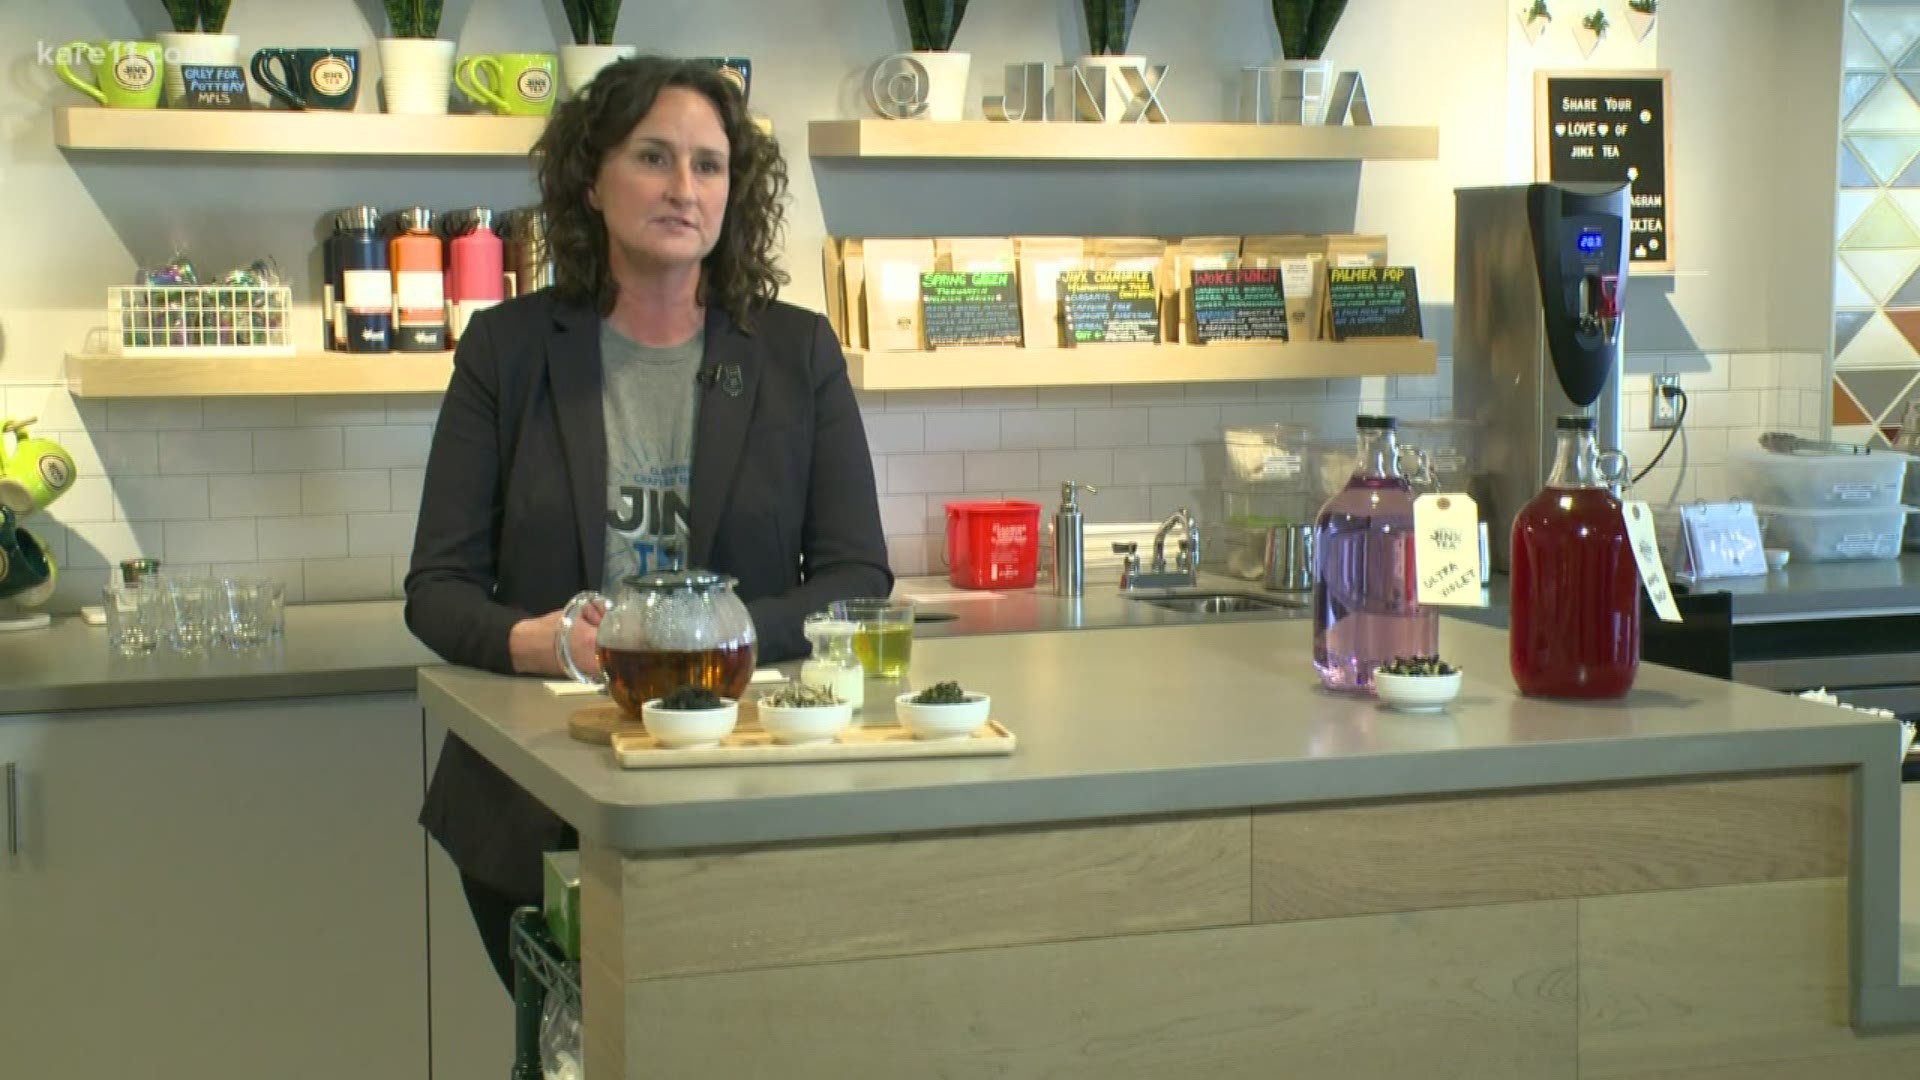 "People have an idea of what tea should be and when they come in here, it's completely different," Jinx Tea Co-Founder Jennifer Wills said.